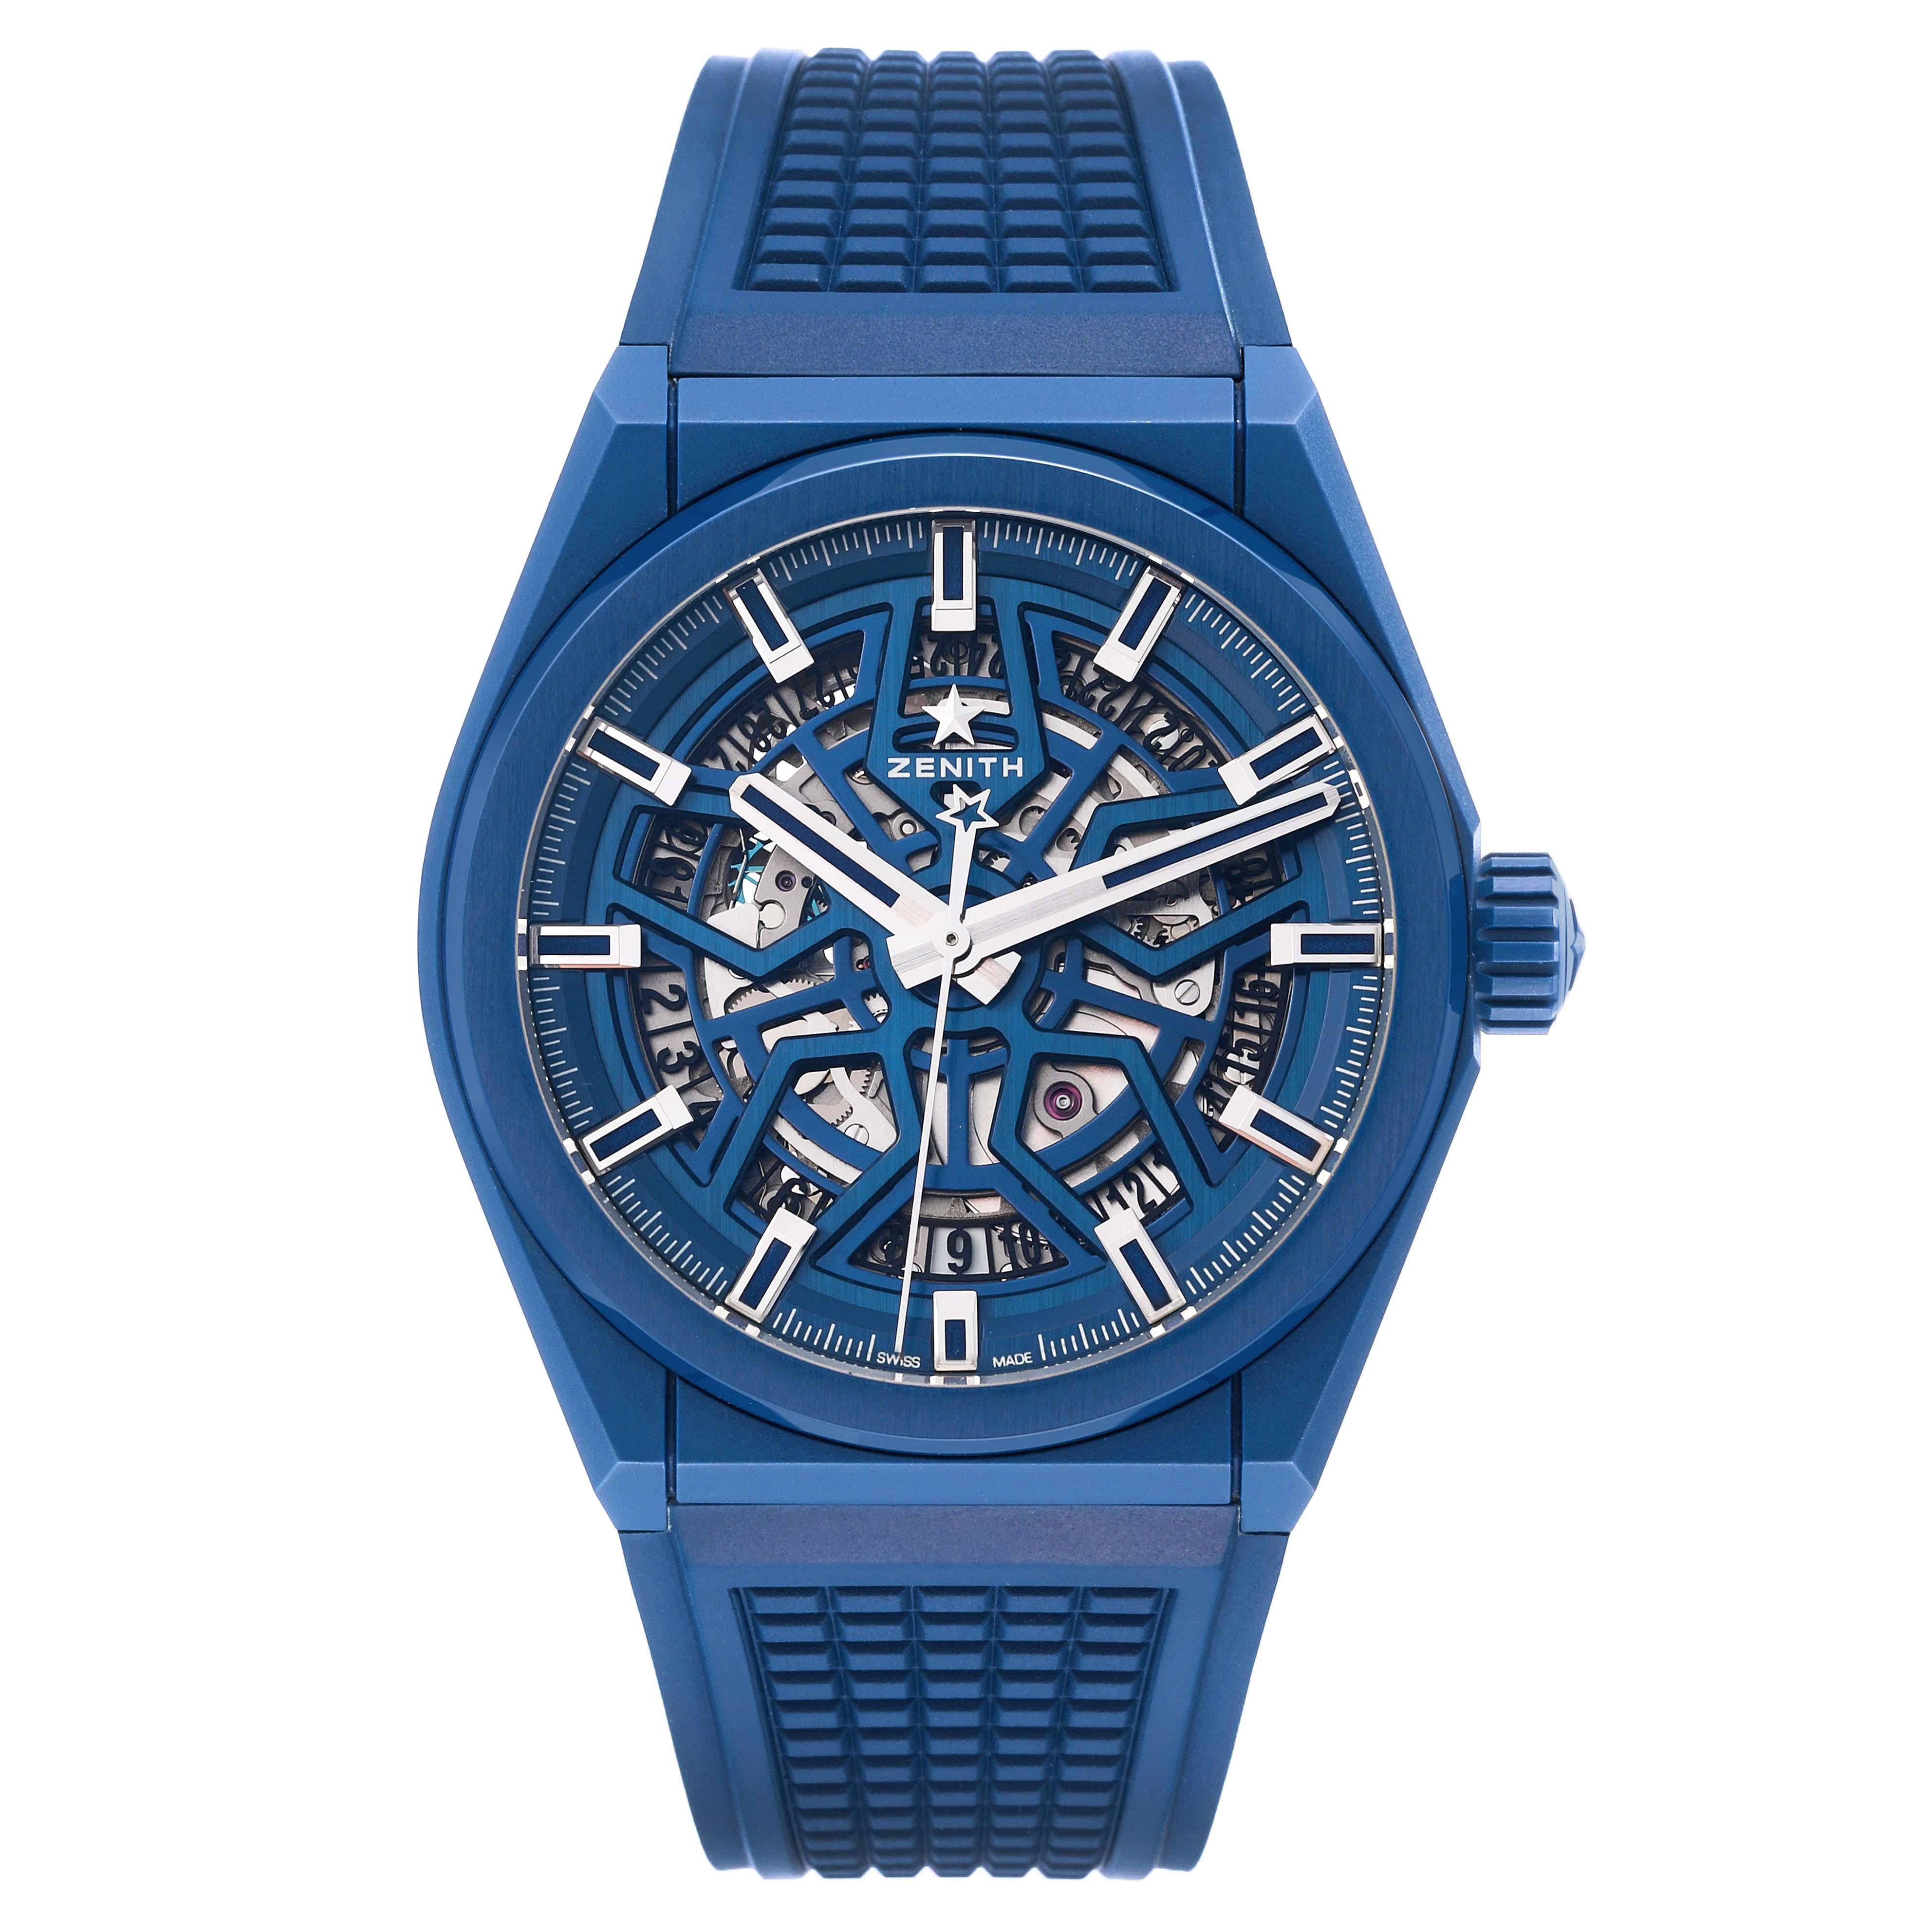 Zenith Defy Classic Skeletal Dial Blue Ceramic Mens Watch 49.9003.670. Automatic self-winding movement. Ceramic case 41mm in diameter. Transparent exhibition sapphire crystal caseback. Fixed blue ceramic bezel. Scratch resistant sapphire crystal.